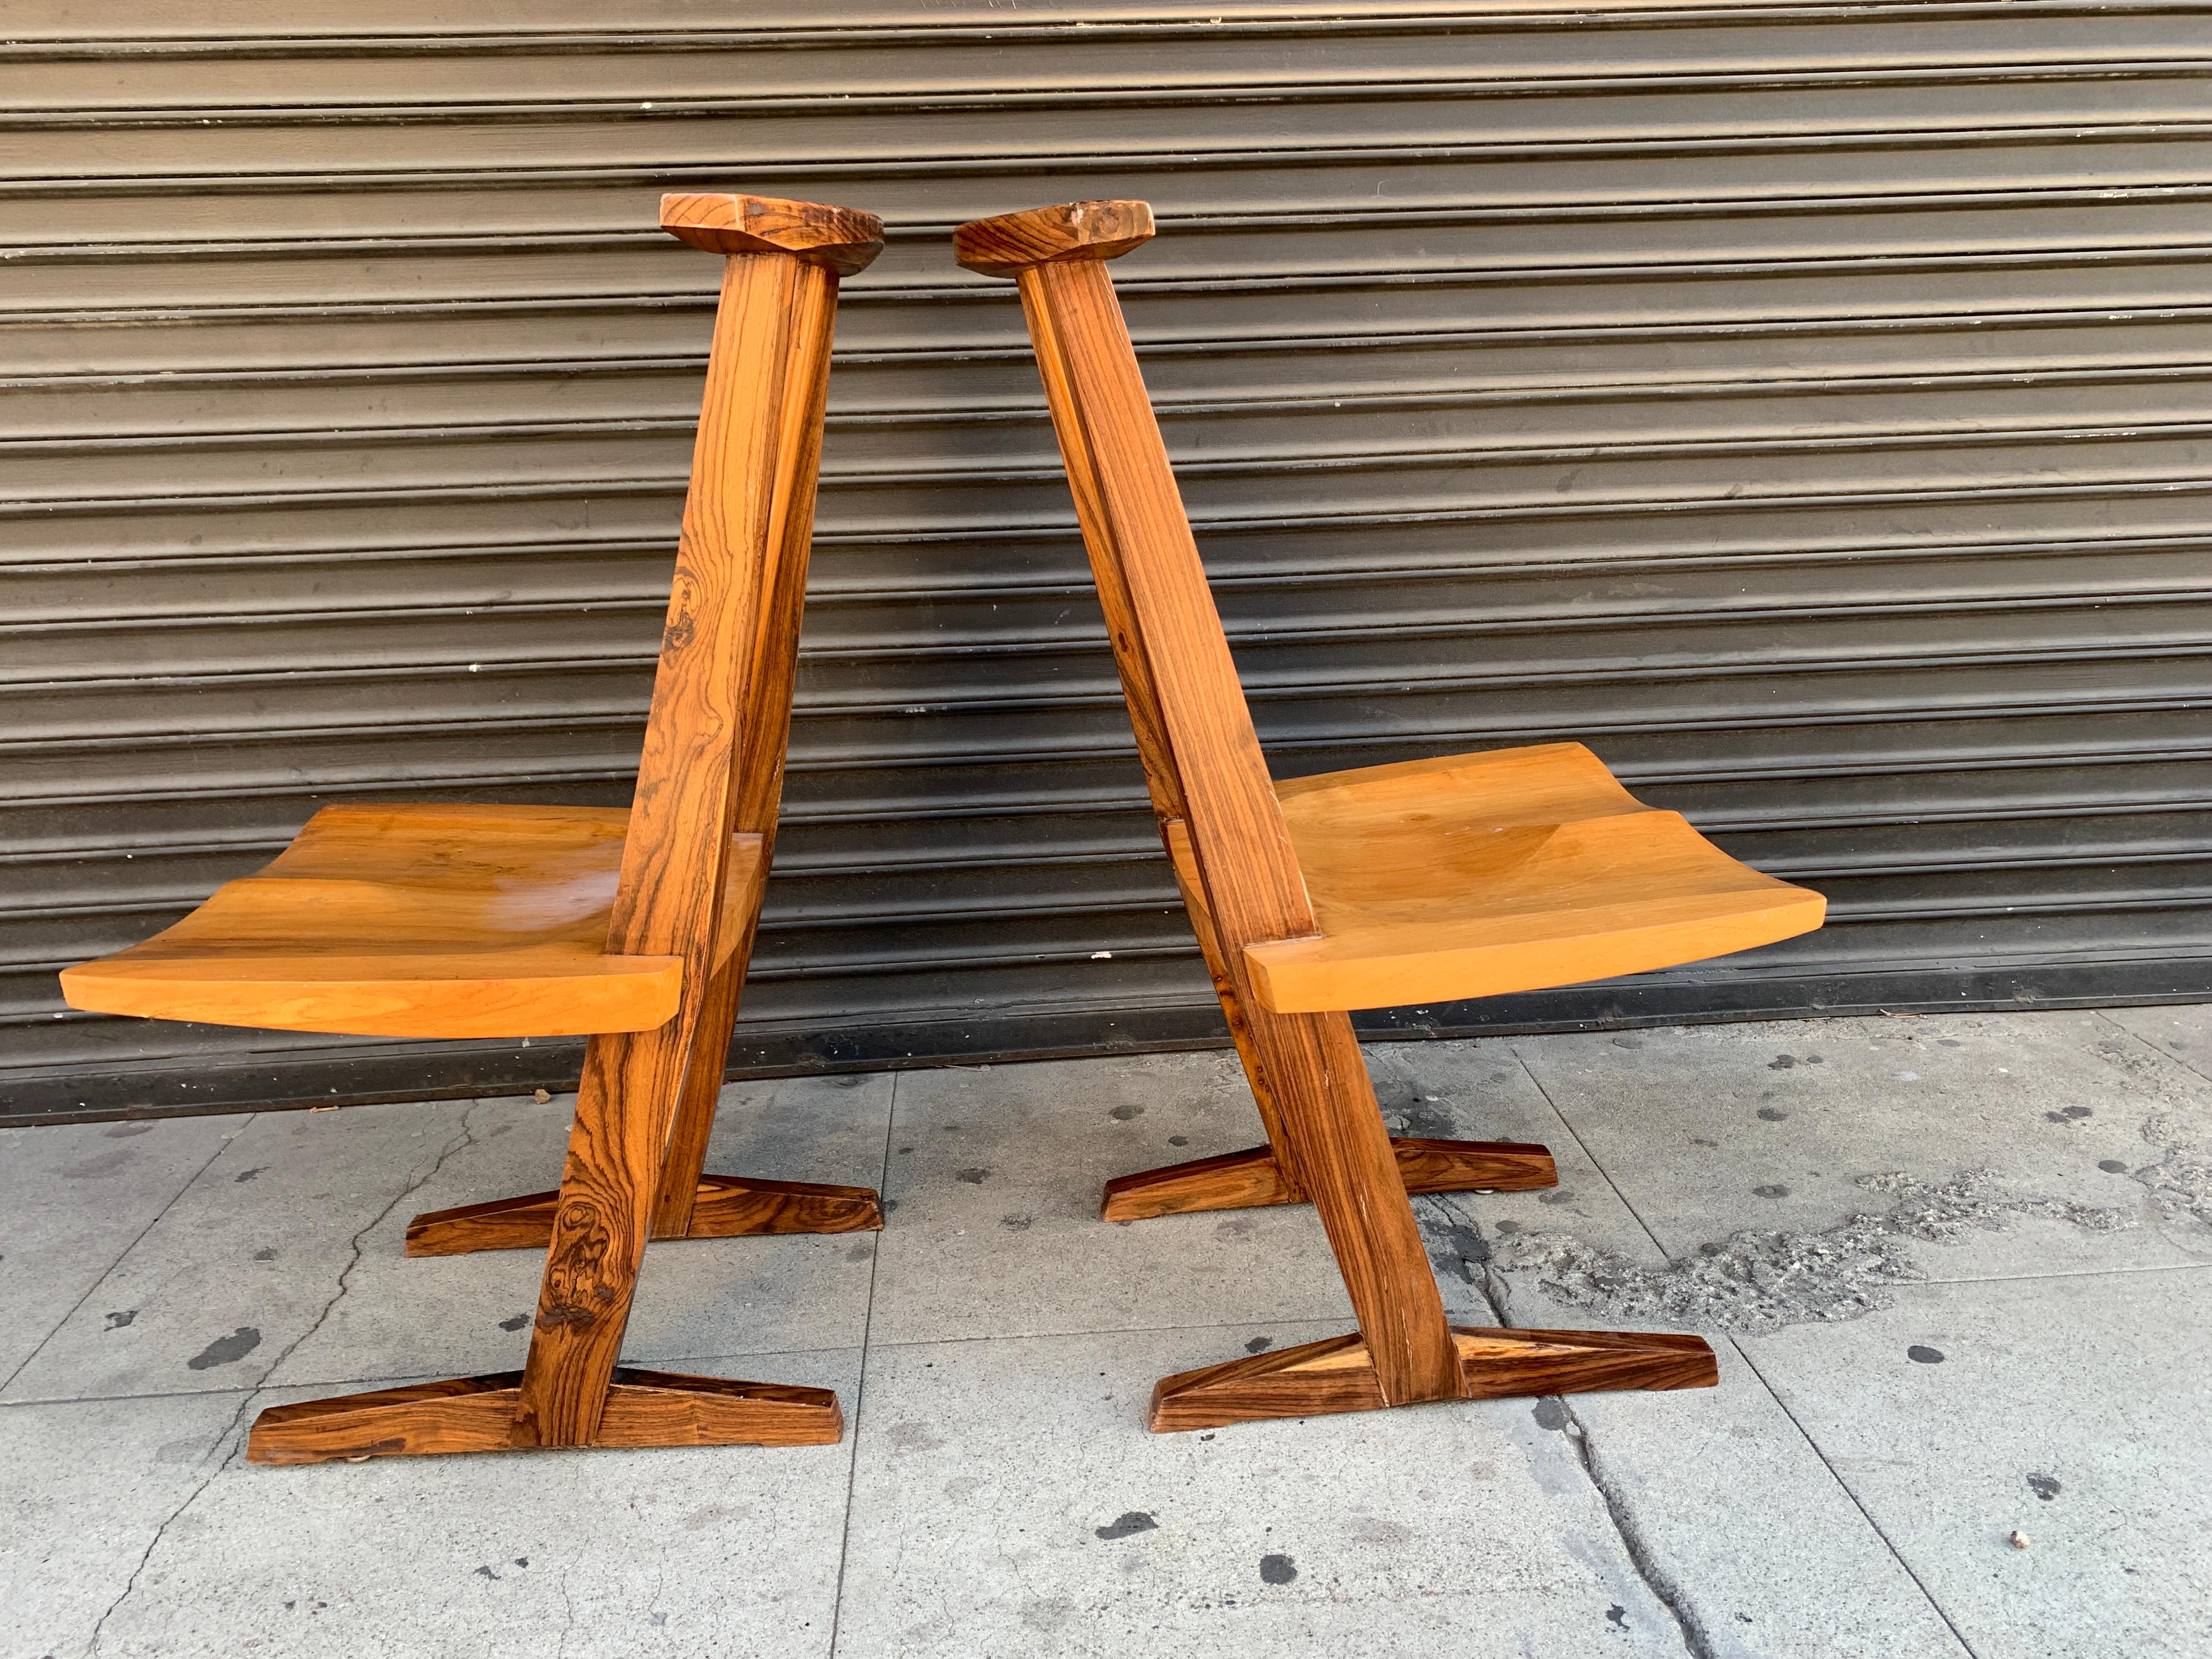 American studio conoid chairs styled after George Nakashima. The chairs features a comb shaped back and molded seat with beautiful architectural lines.
Please note of wear consistent with age.

Measurements:
Height 41.00 in. 
Width 20.00 in.